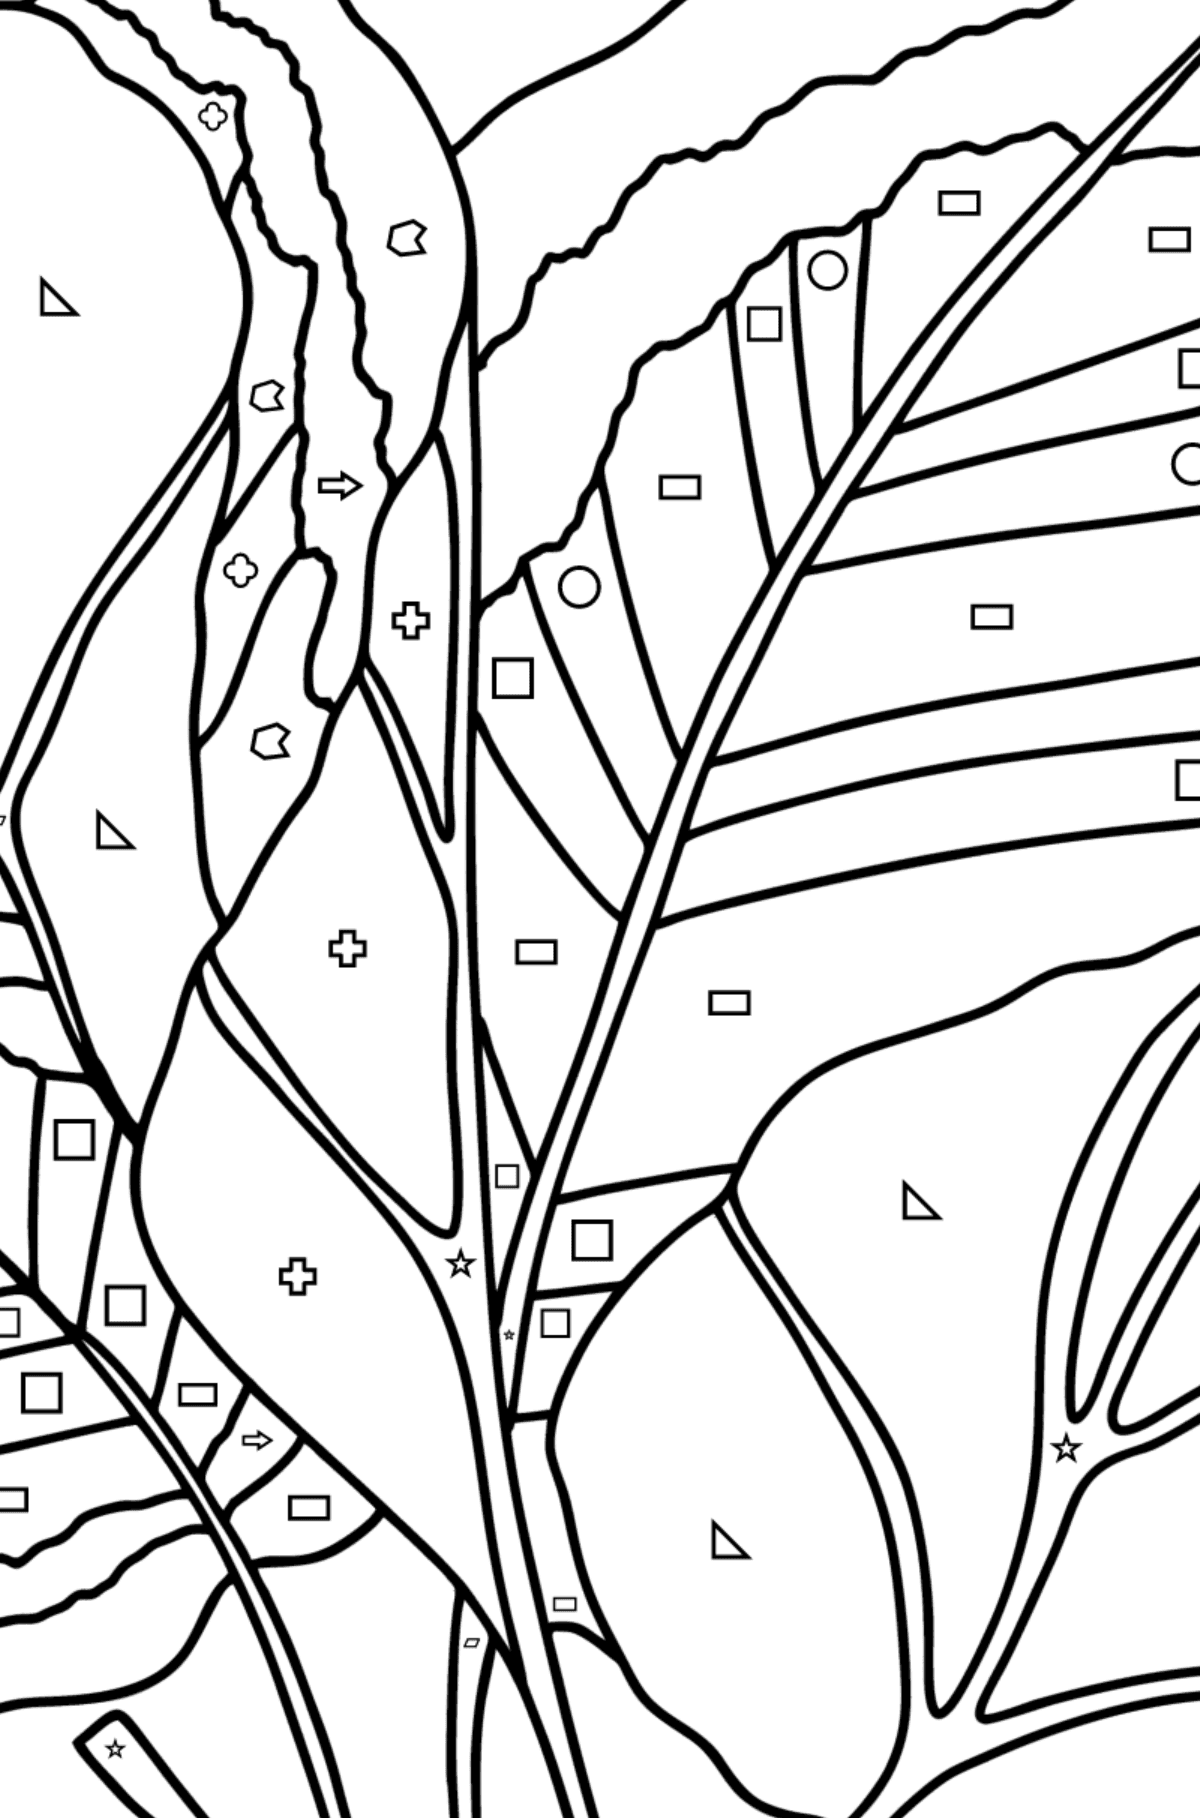 Arrowroot coloring page - Coloring by Geometric Shapes for Kids